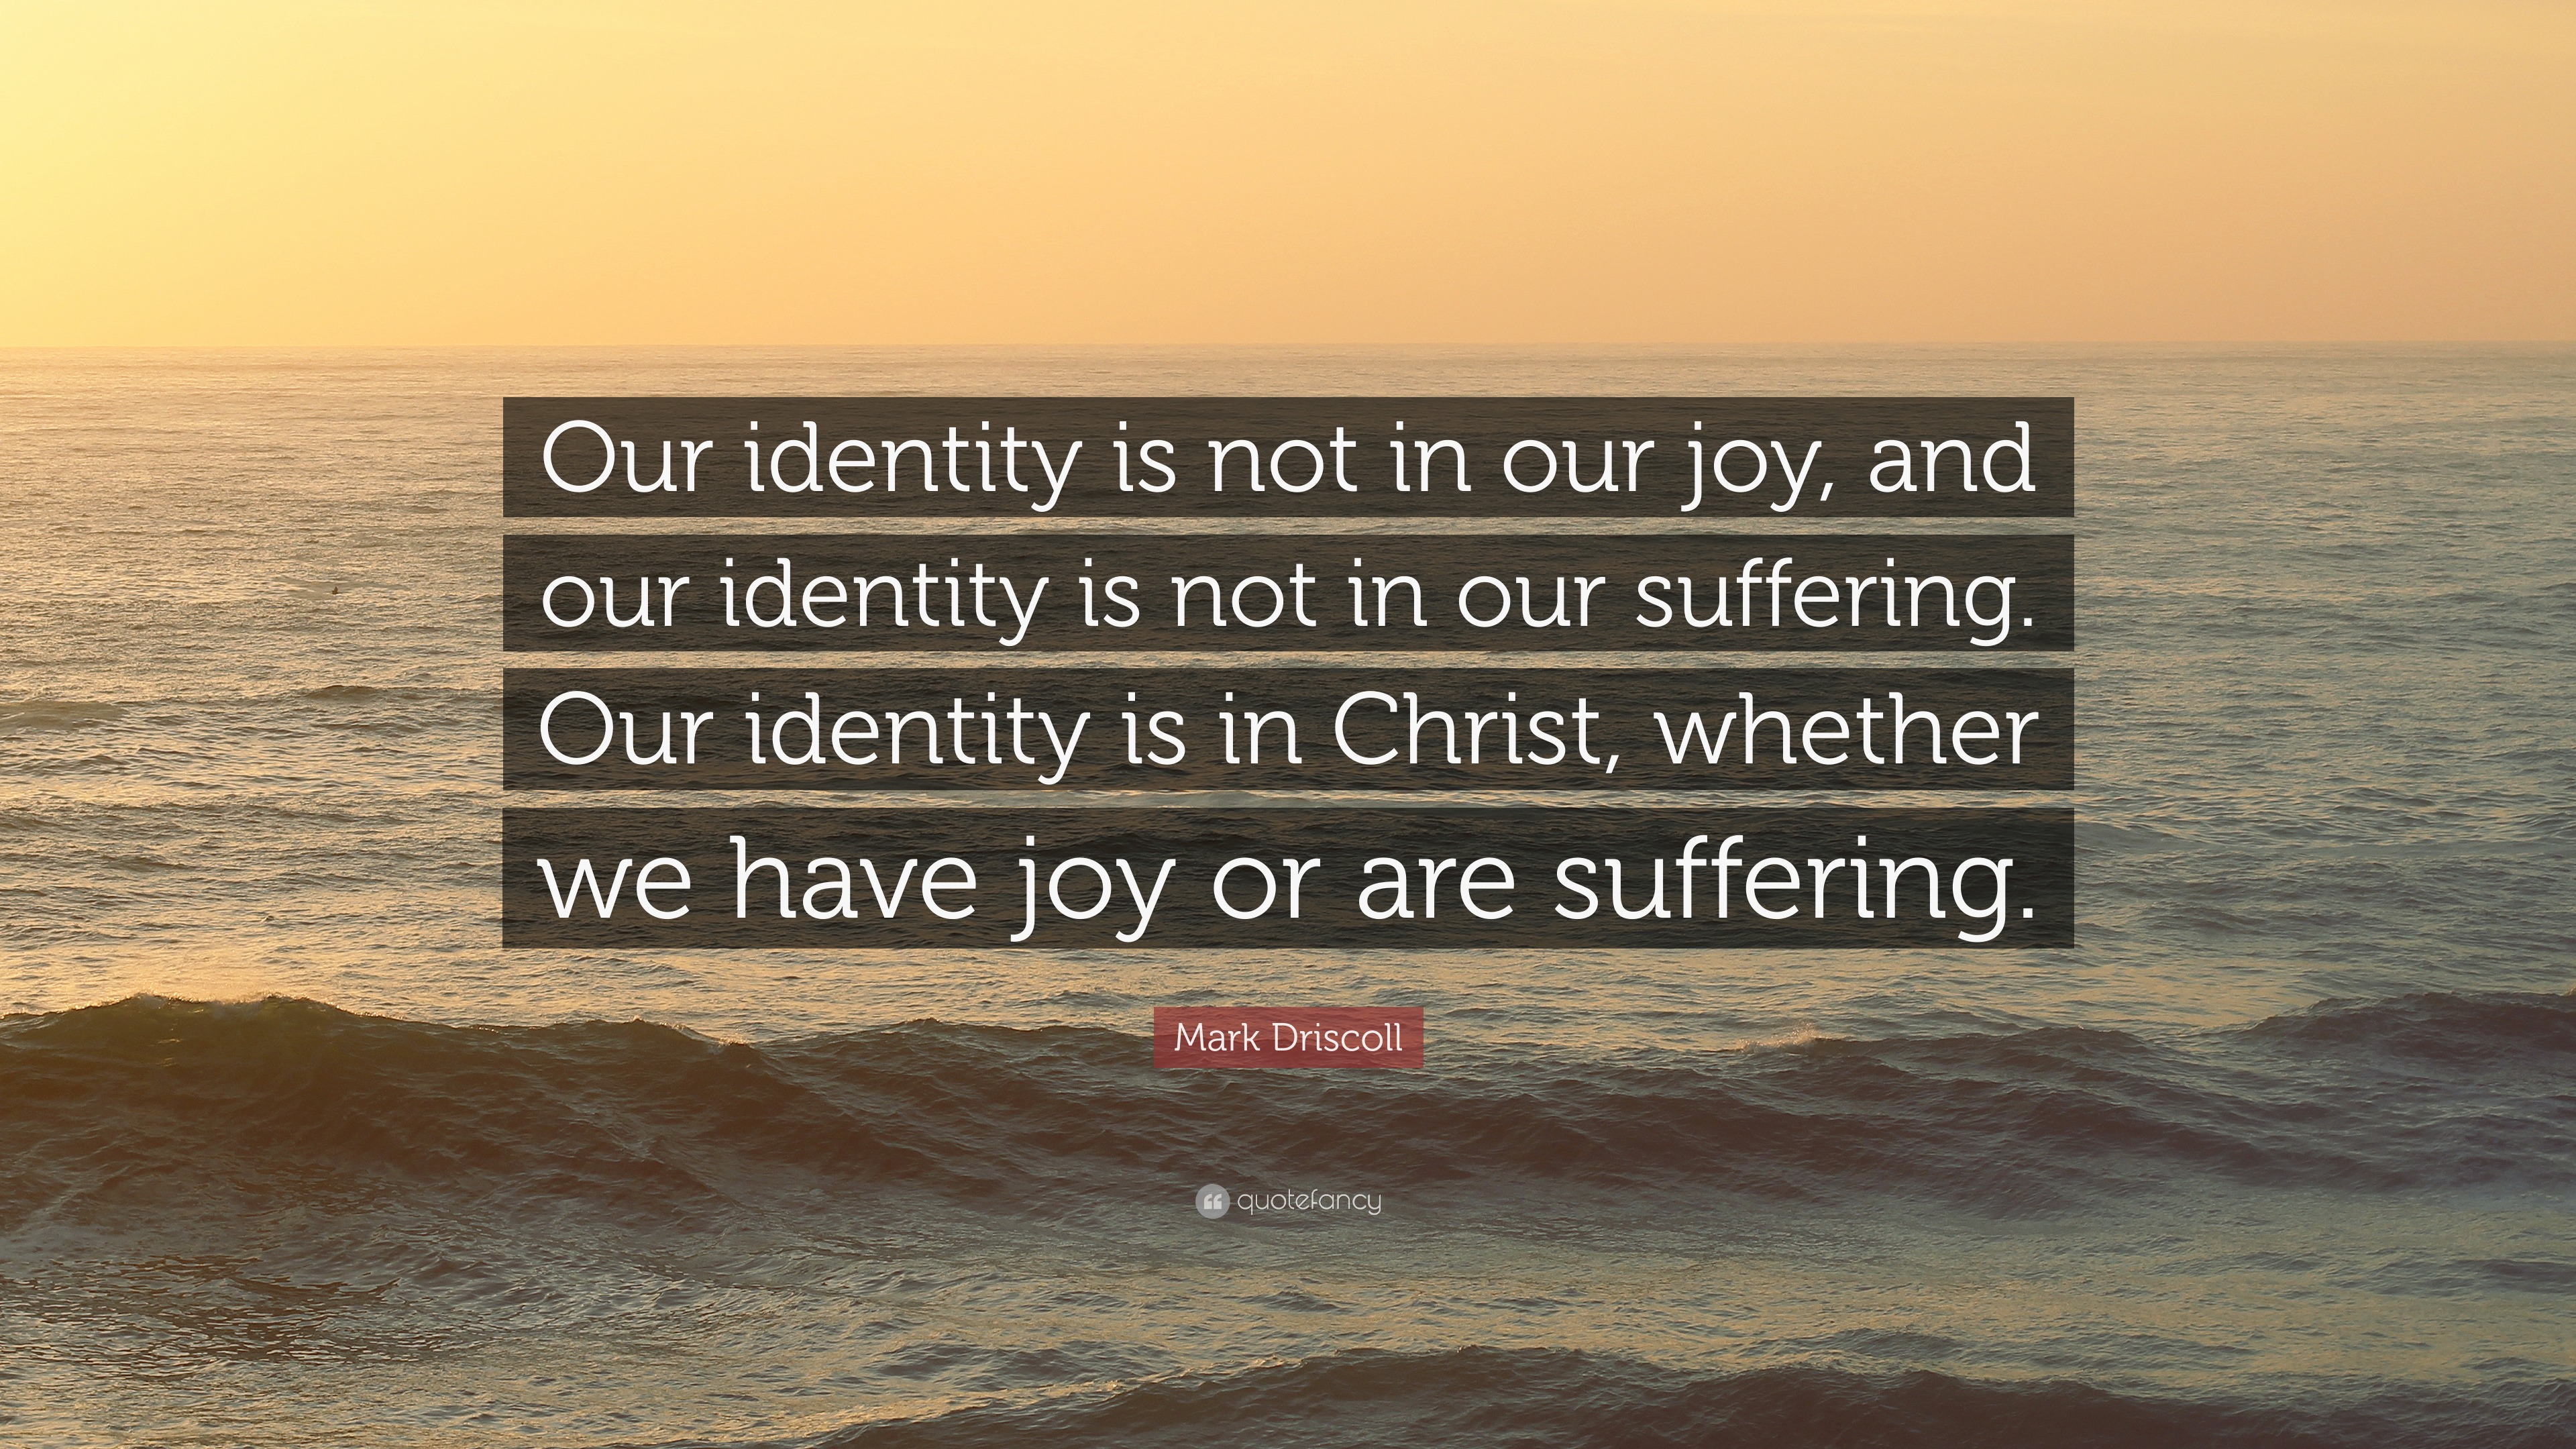 tad r callister our identity largely determines our destiny